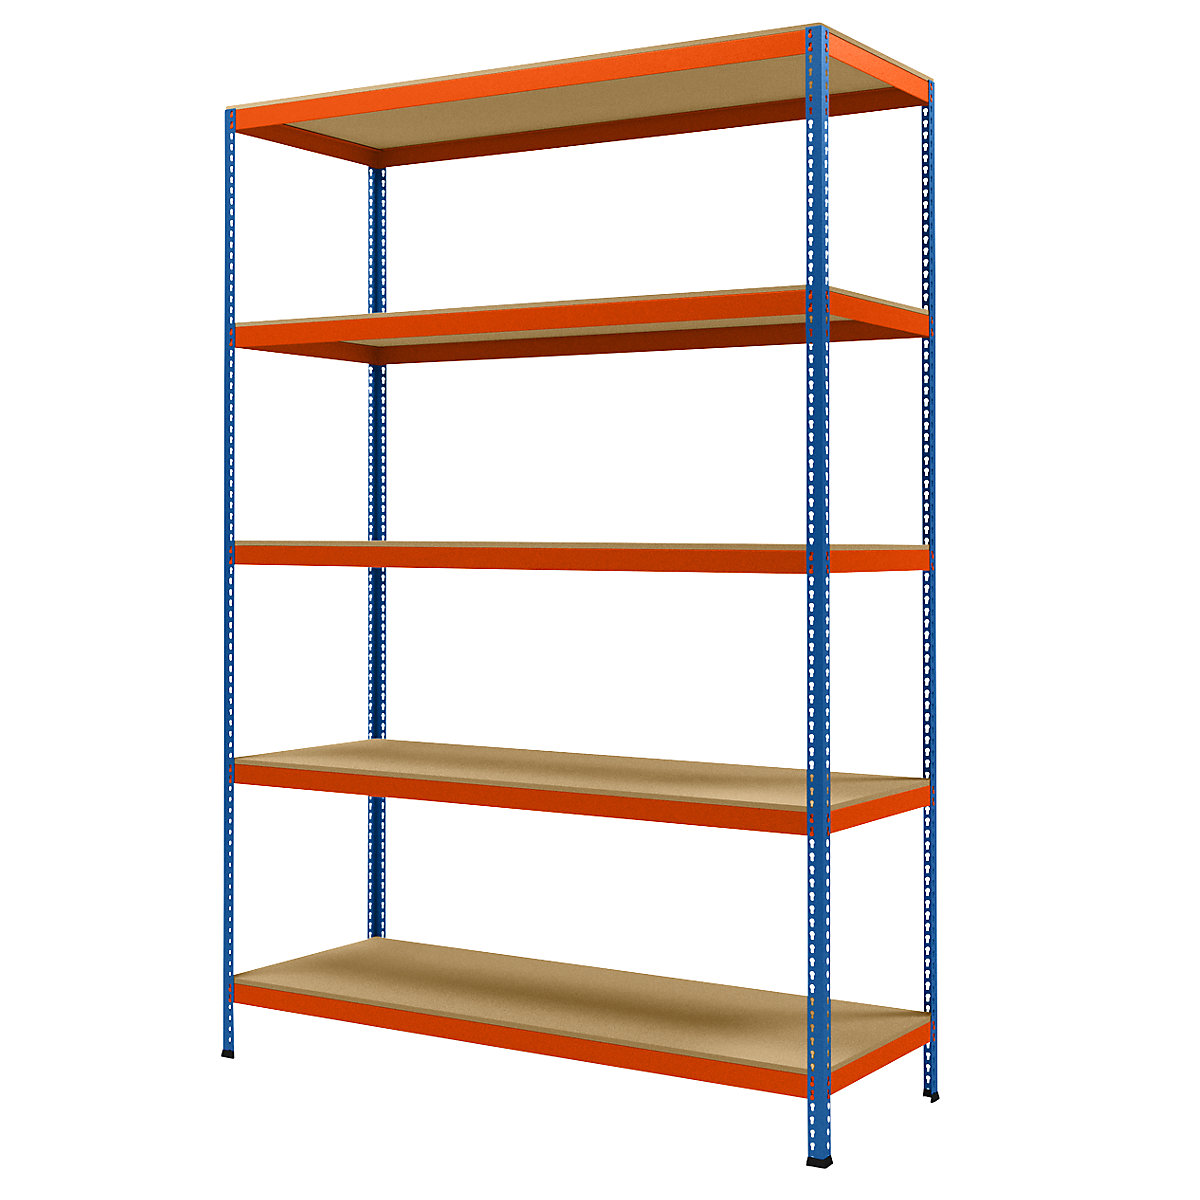 Wide span heavy duty shelving, height 3048 mm, overall depth 773 mm, width 2146 mm